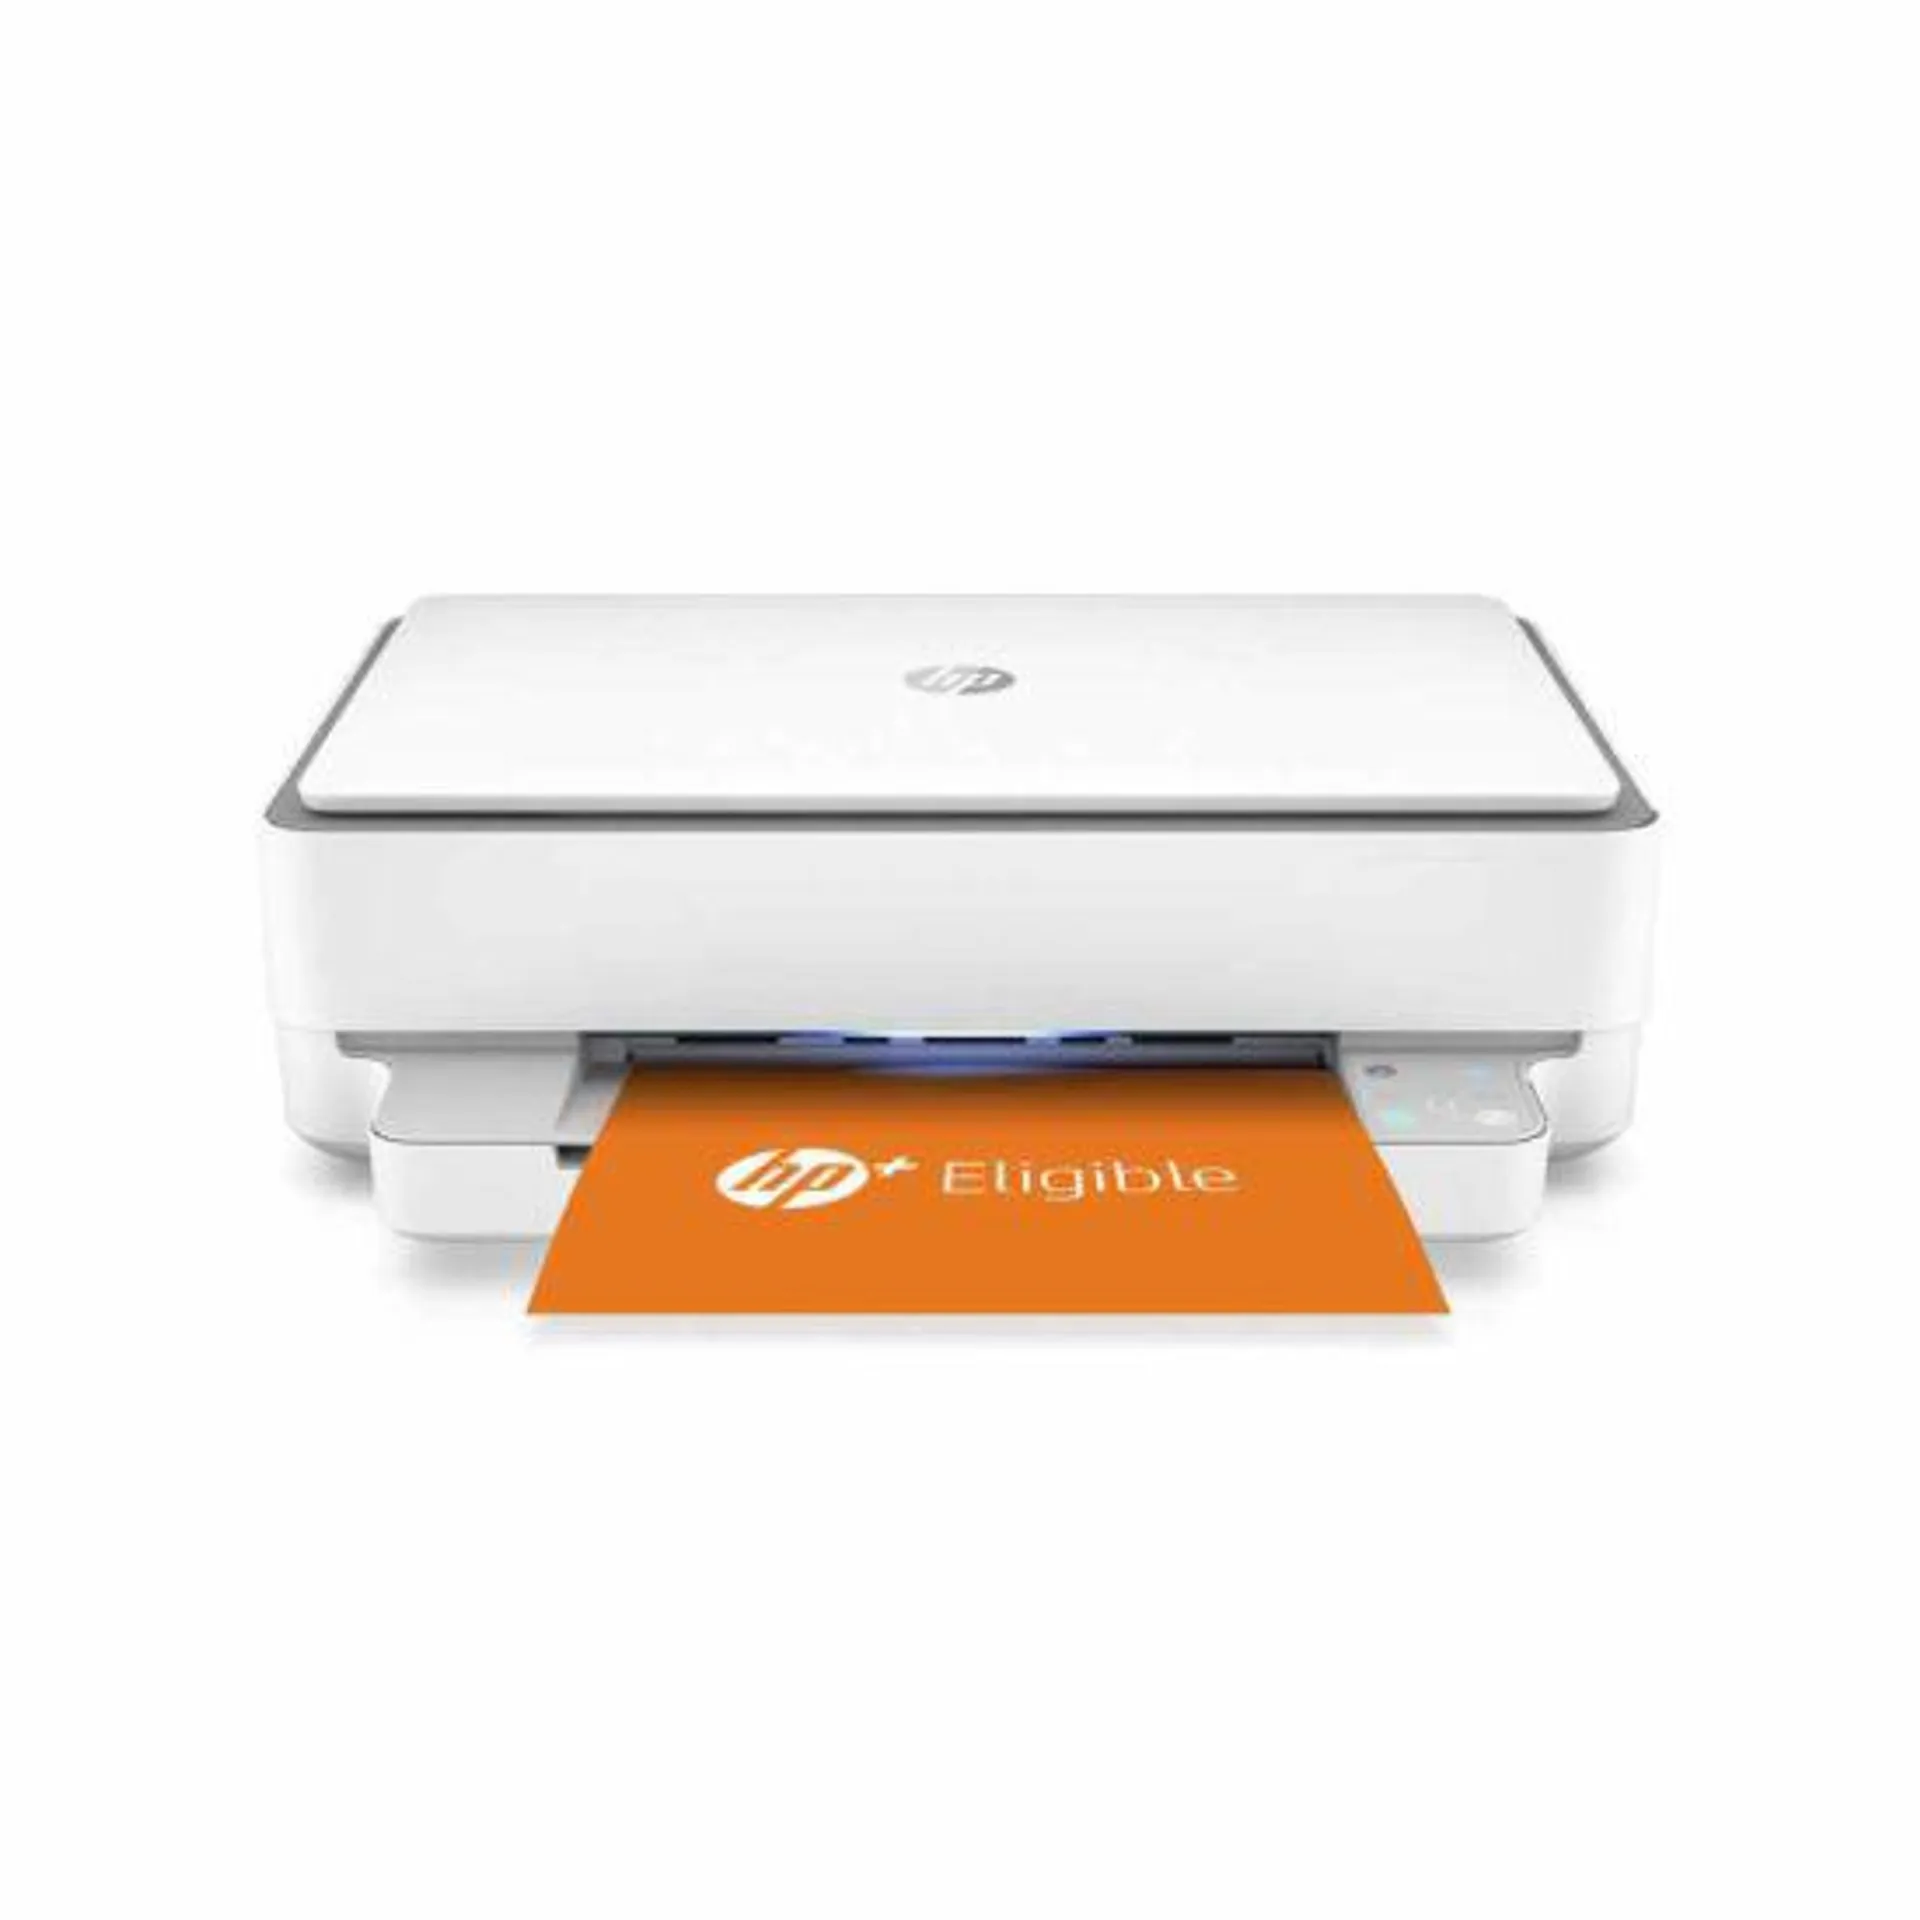 HP Envy 6020e All in One Printer with HP Plus and 6 Months Instant Ink